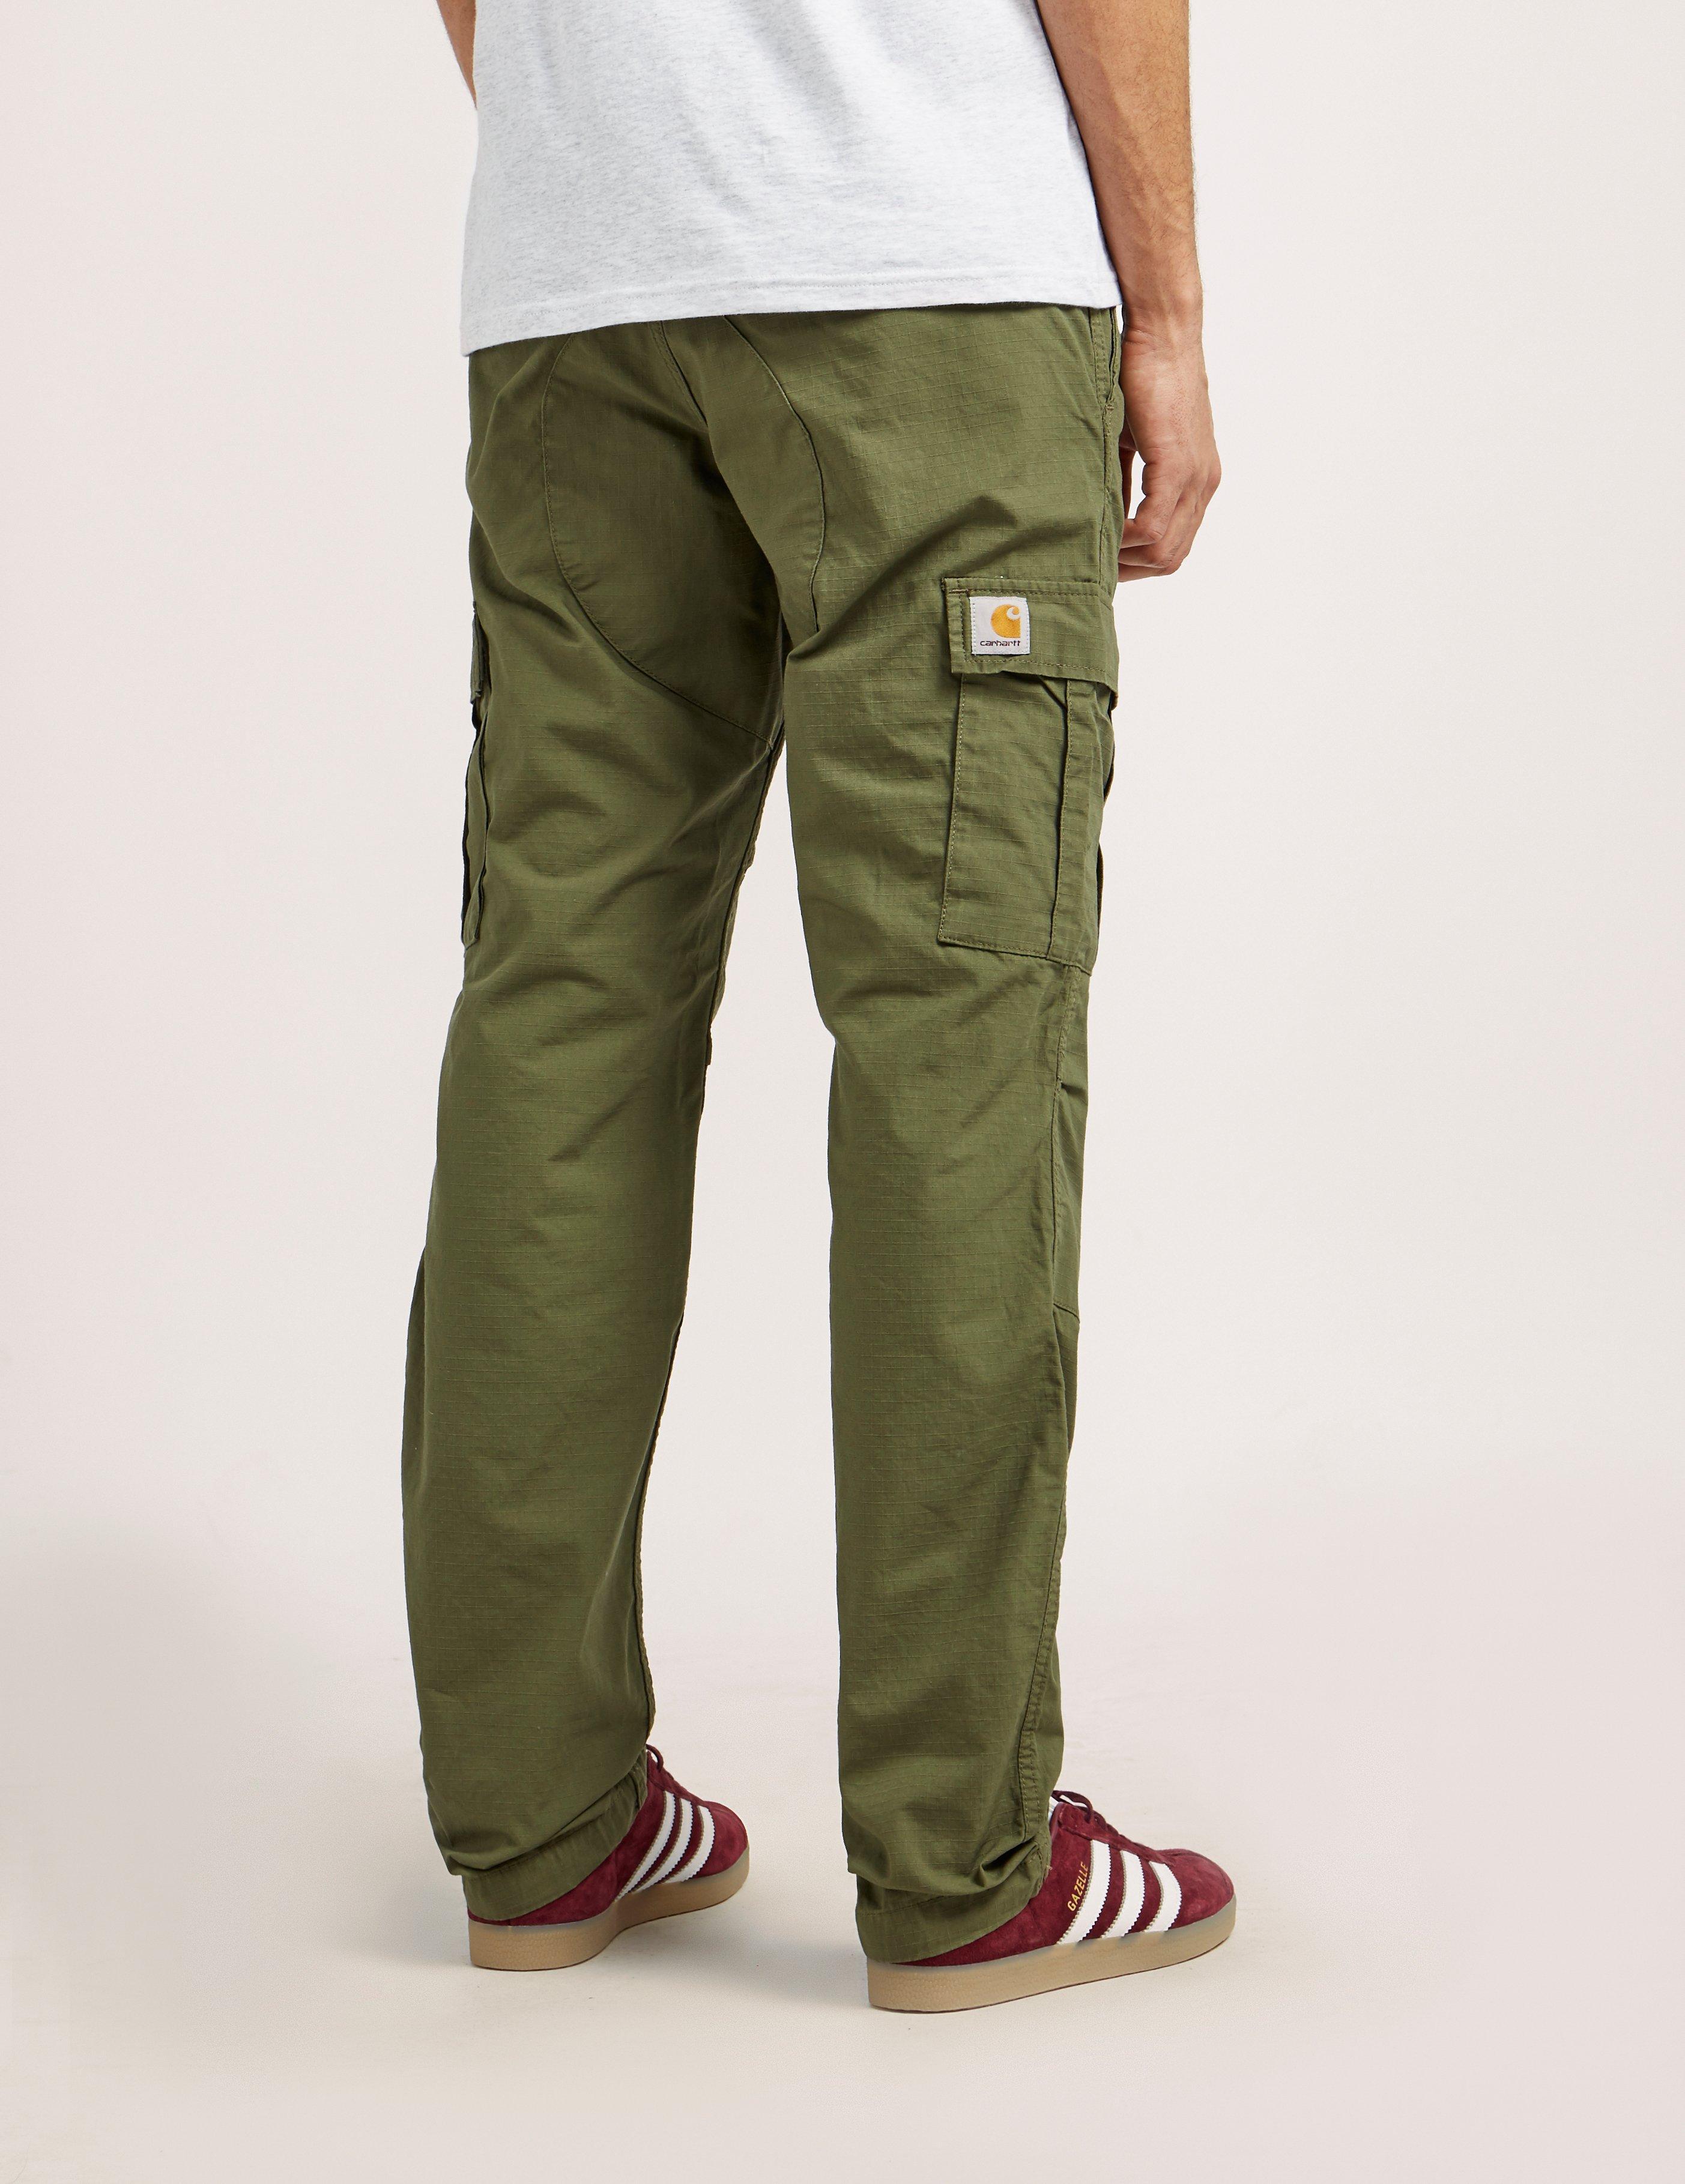 Lyst - Carhartt WIP Aviation Pant in Green for Men